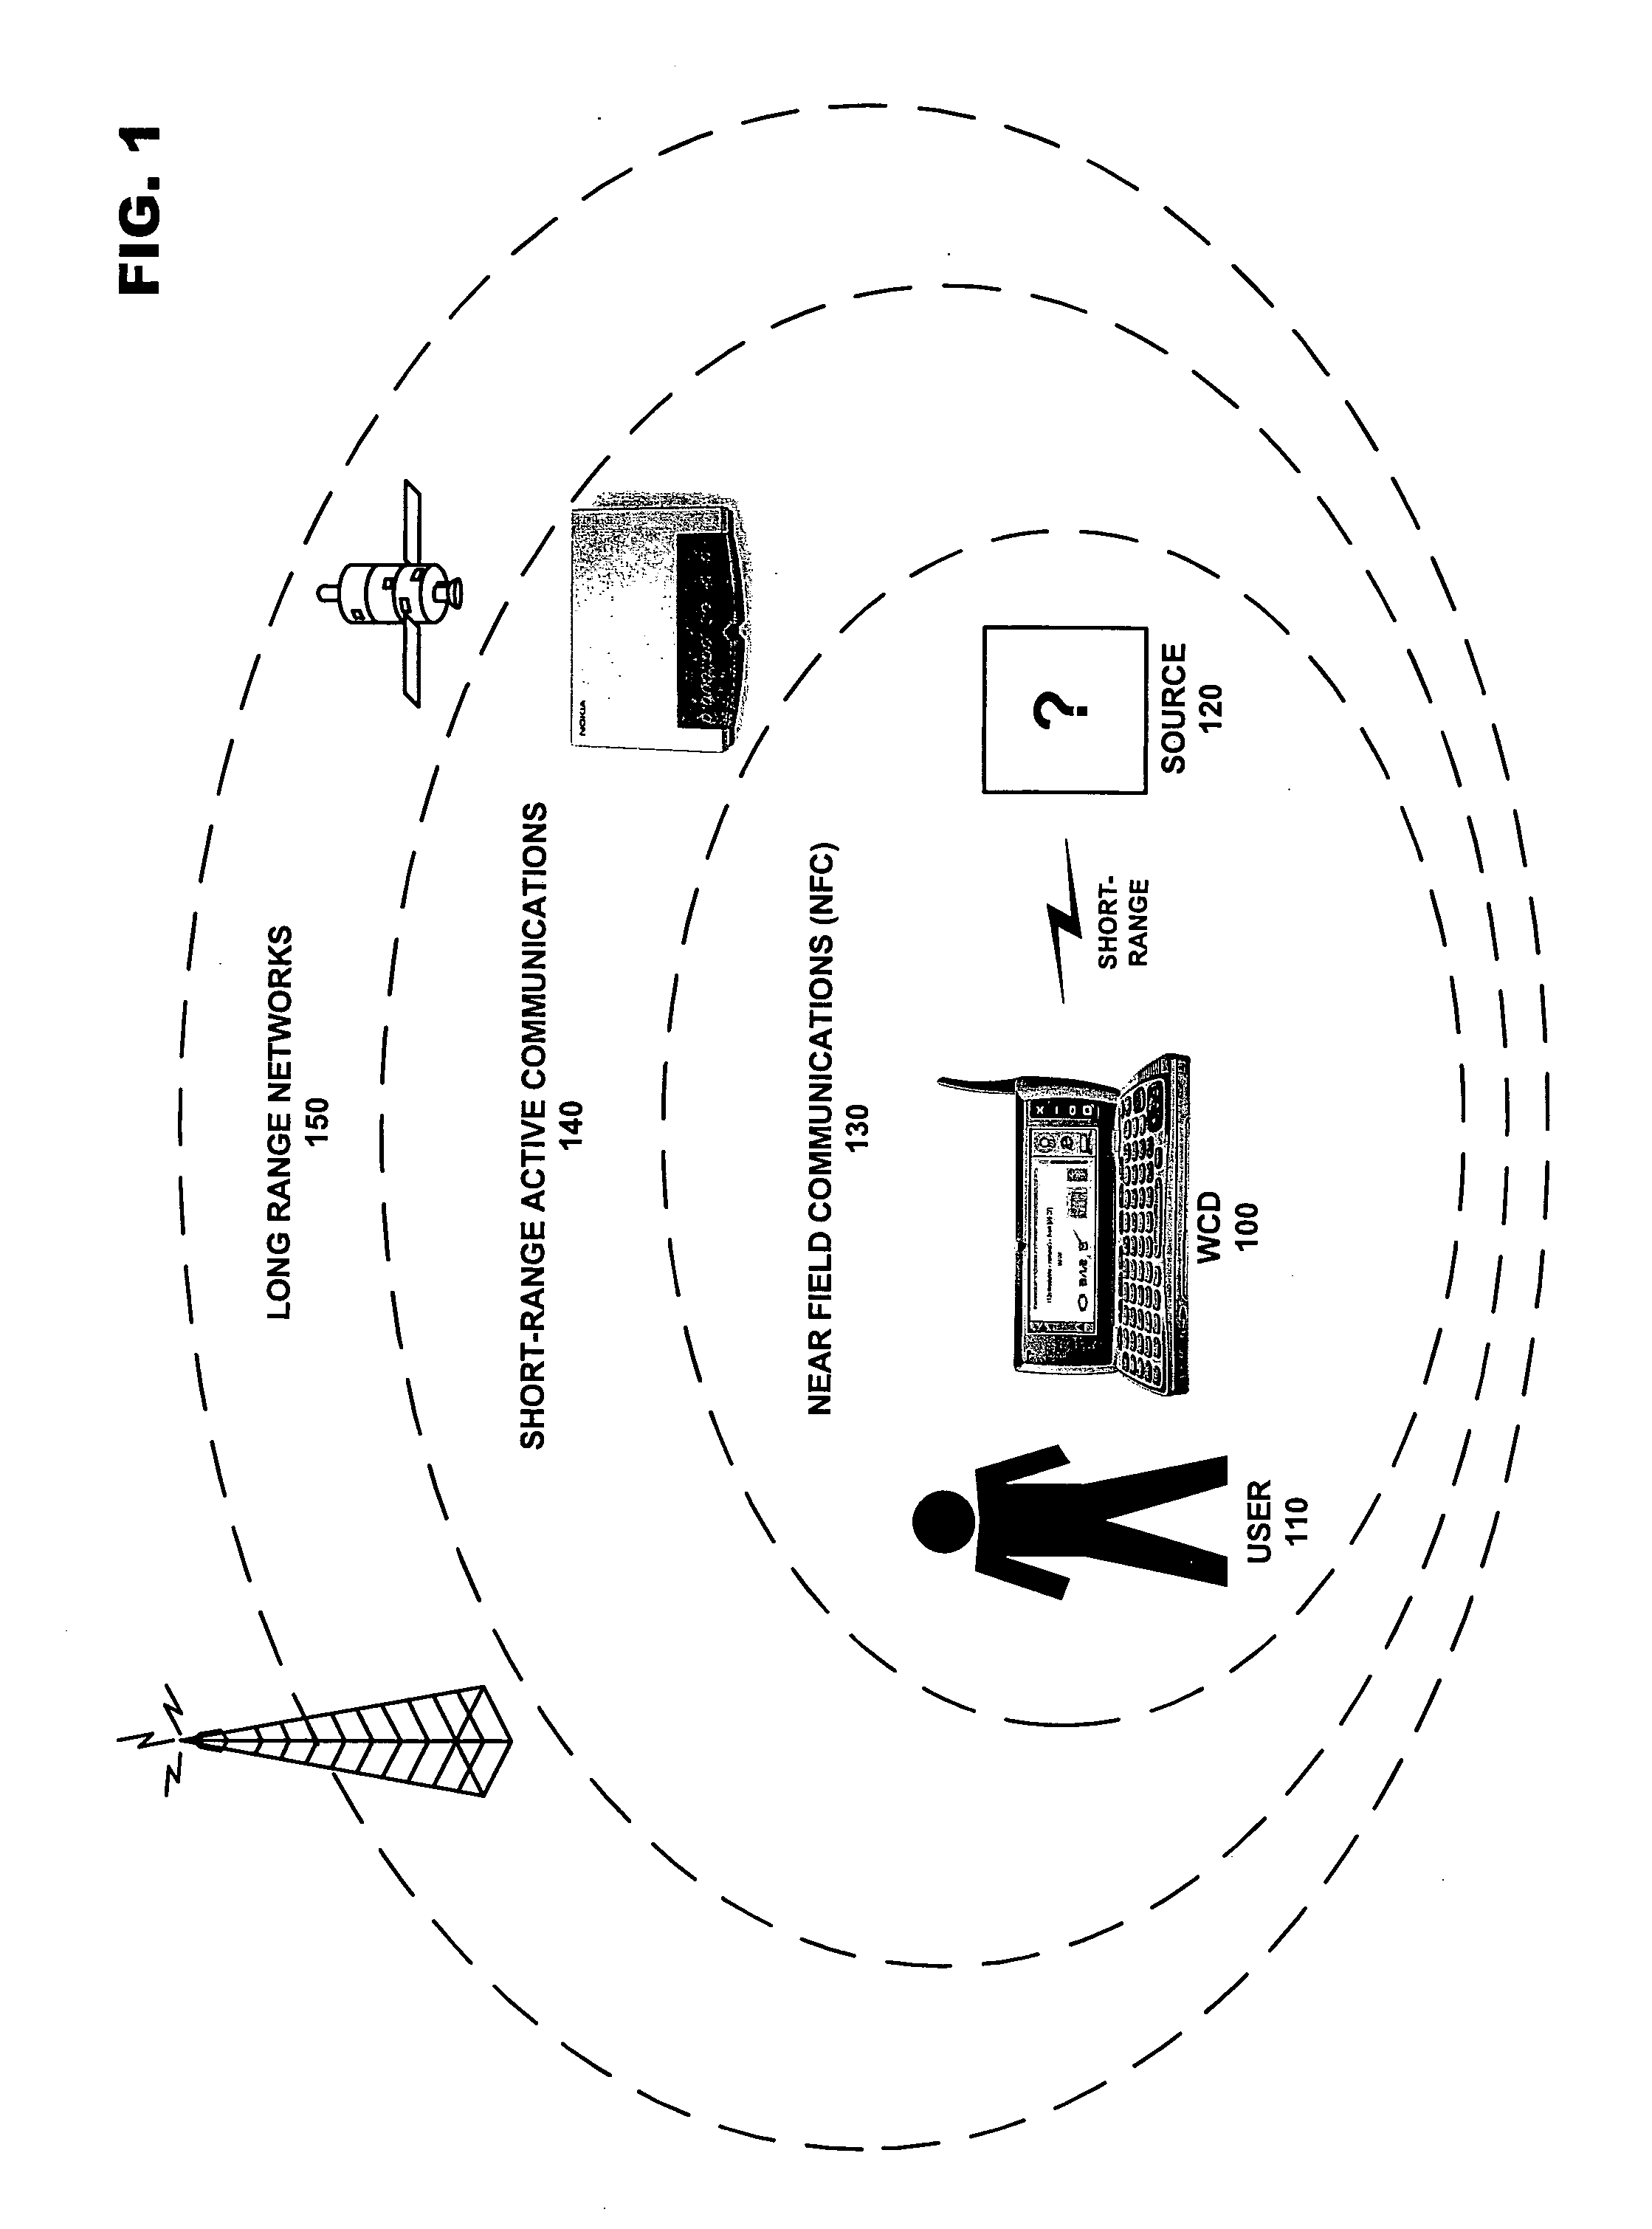 System and methods for direction finding using a handheld device